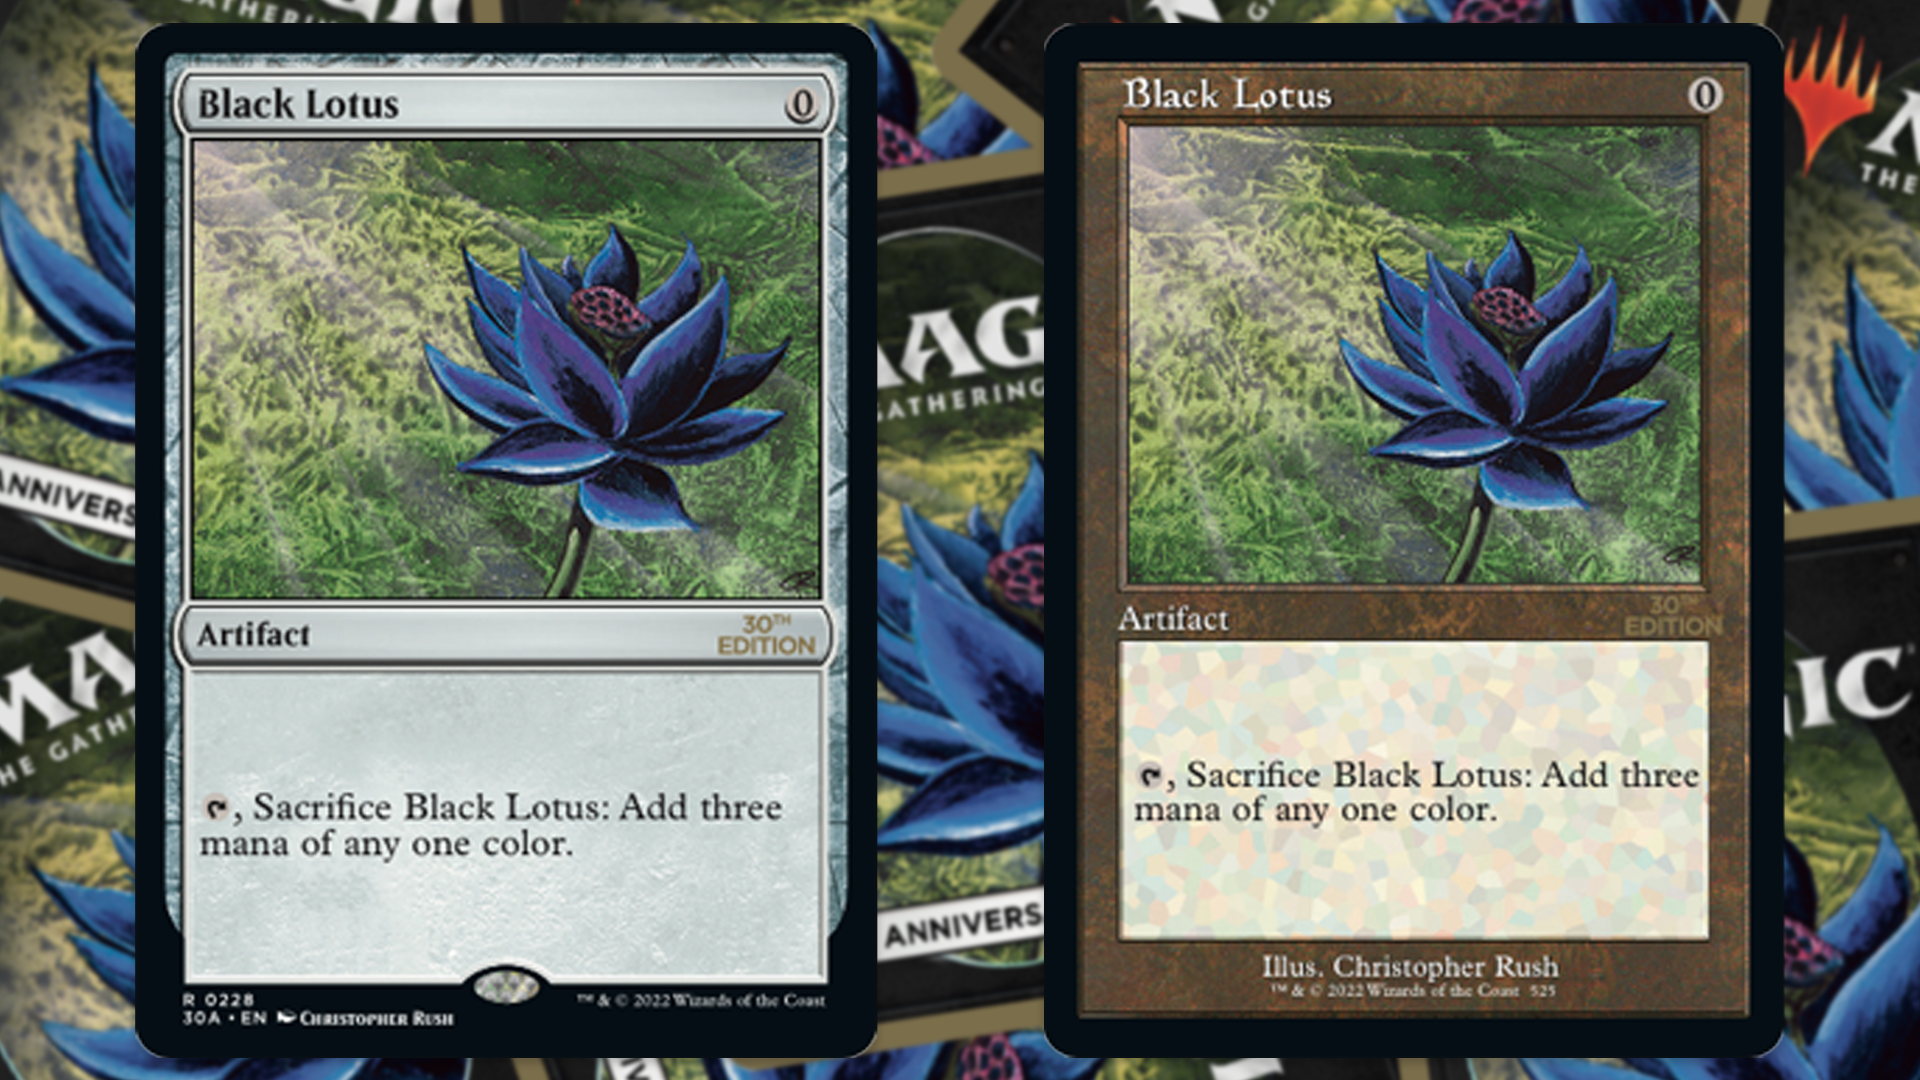 Image for Magic: The Gathering’s 30th Anniversary Edition reprints classic cards, including Black Lotus, in a $1,000 set